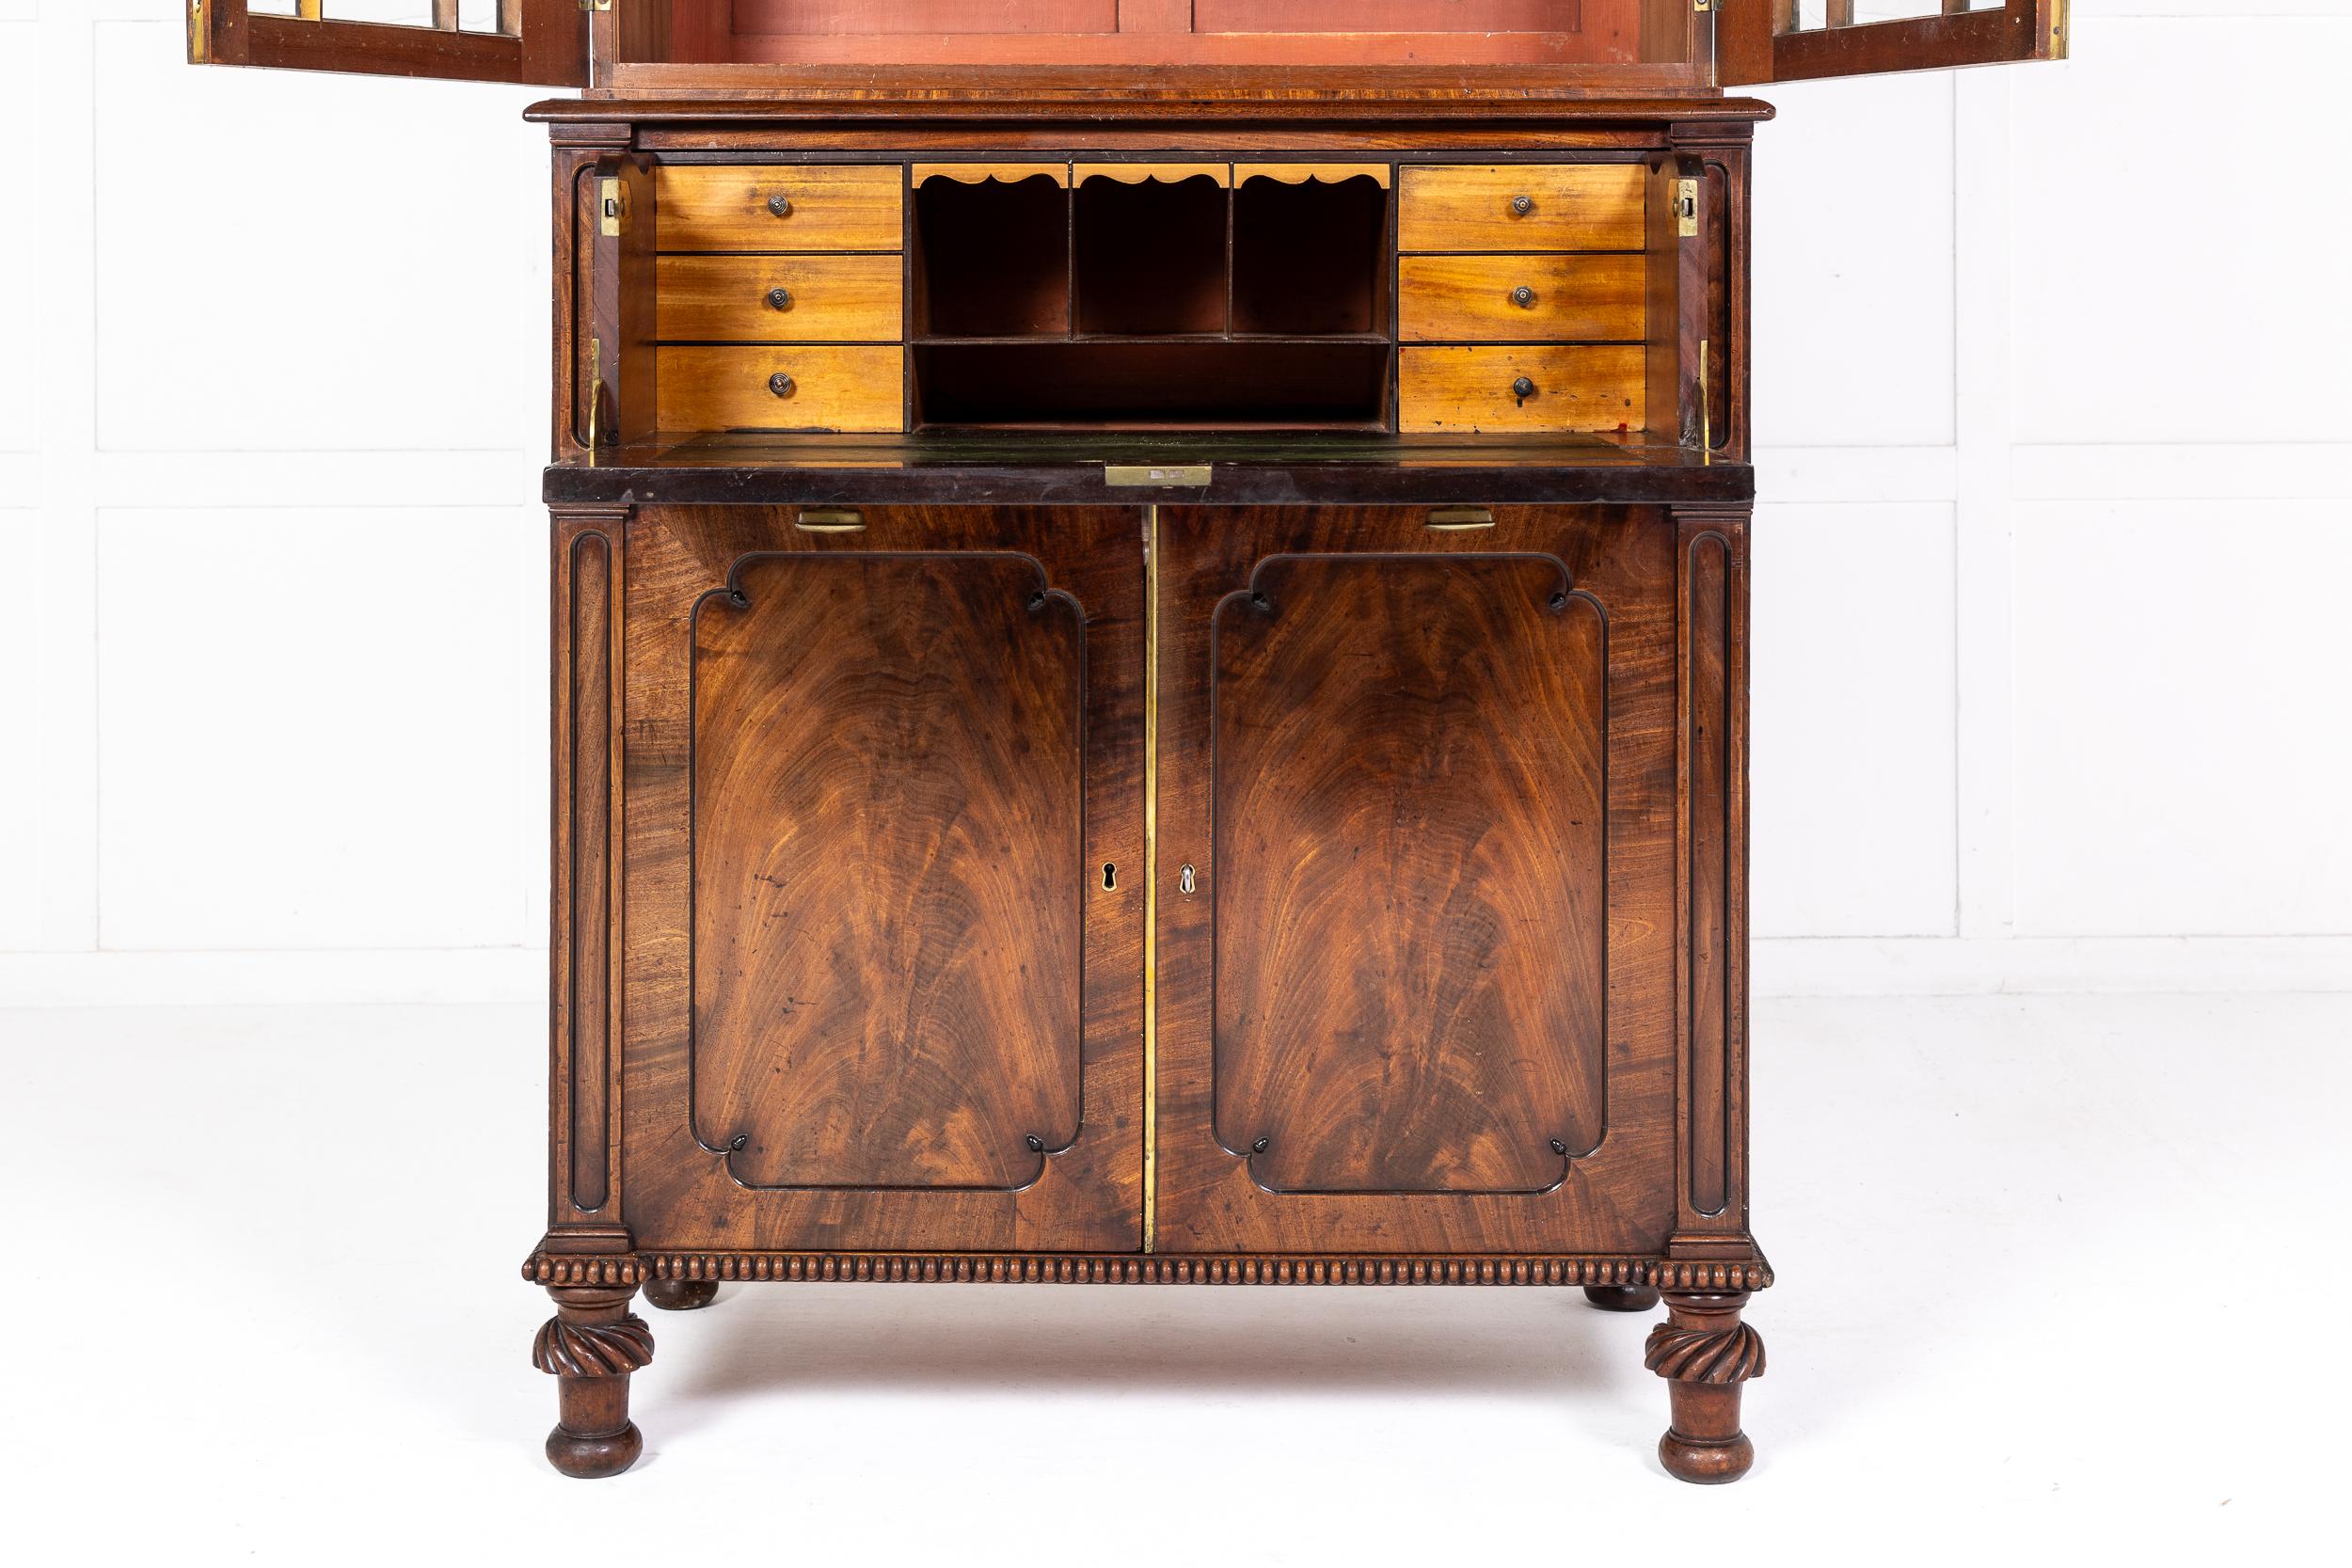 Early 19th Century Late Regency Period Mahogany Secretaire Bookcase Circa 1825-30 For Sale